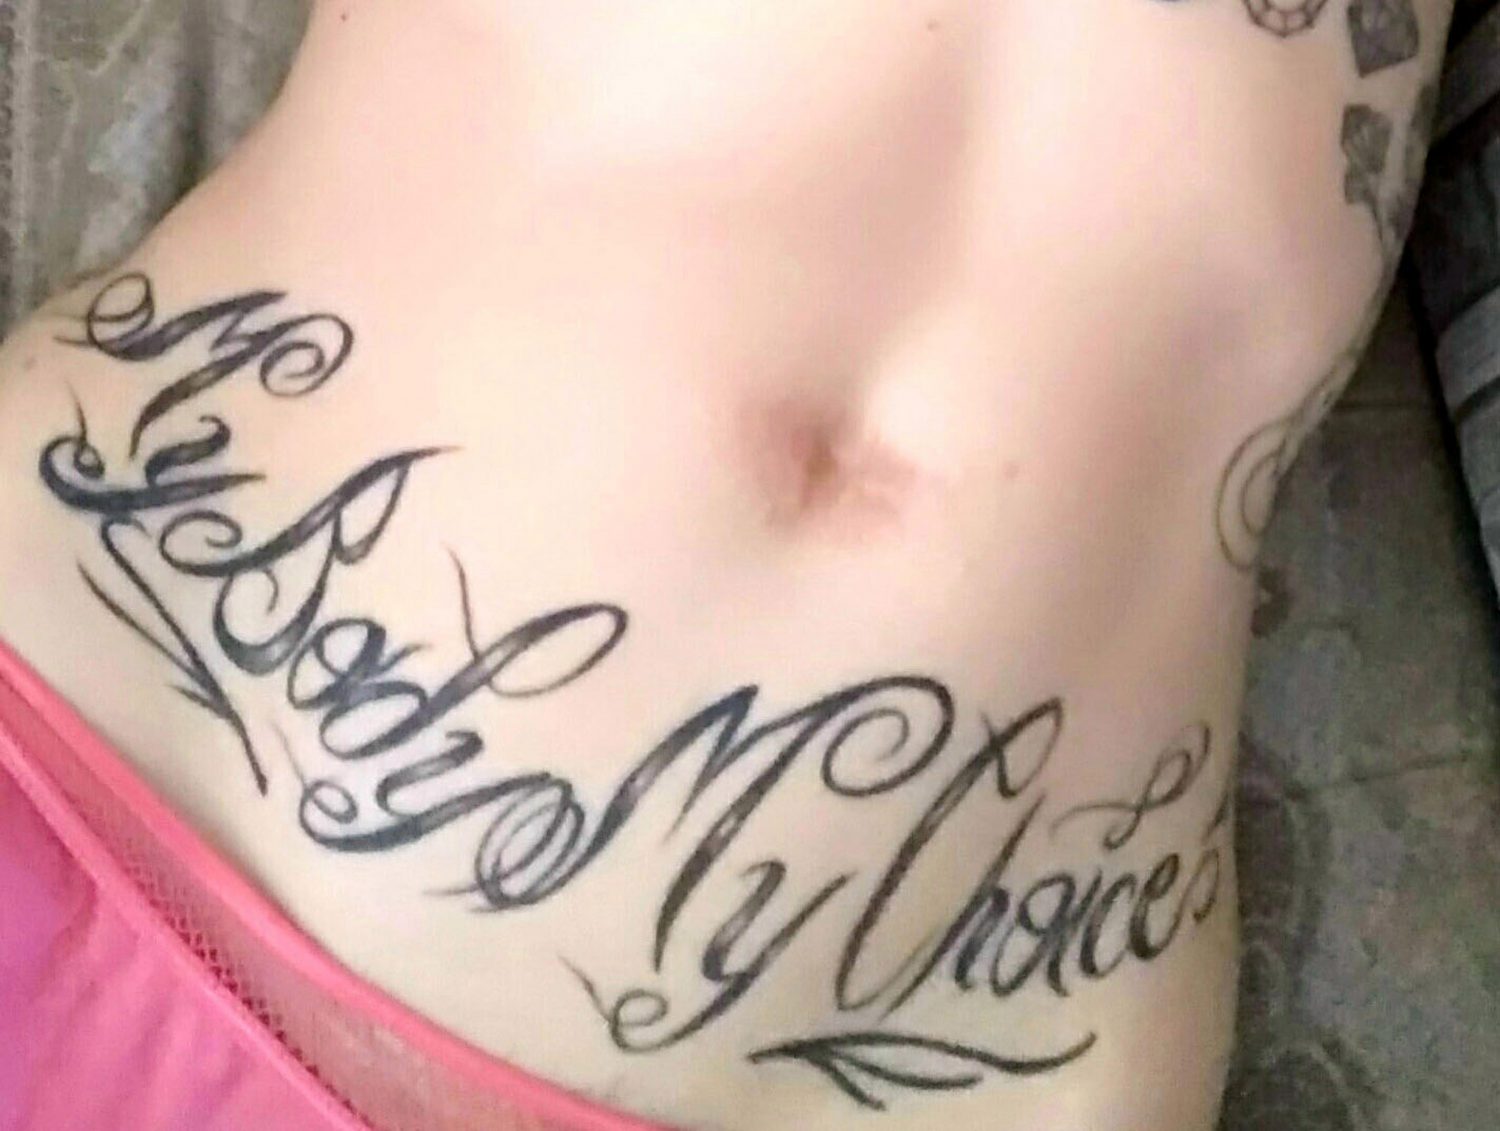 woman removes her belly button and gifts it to her boyfriend